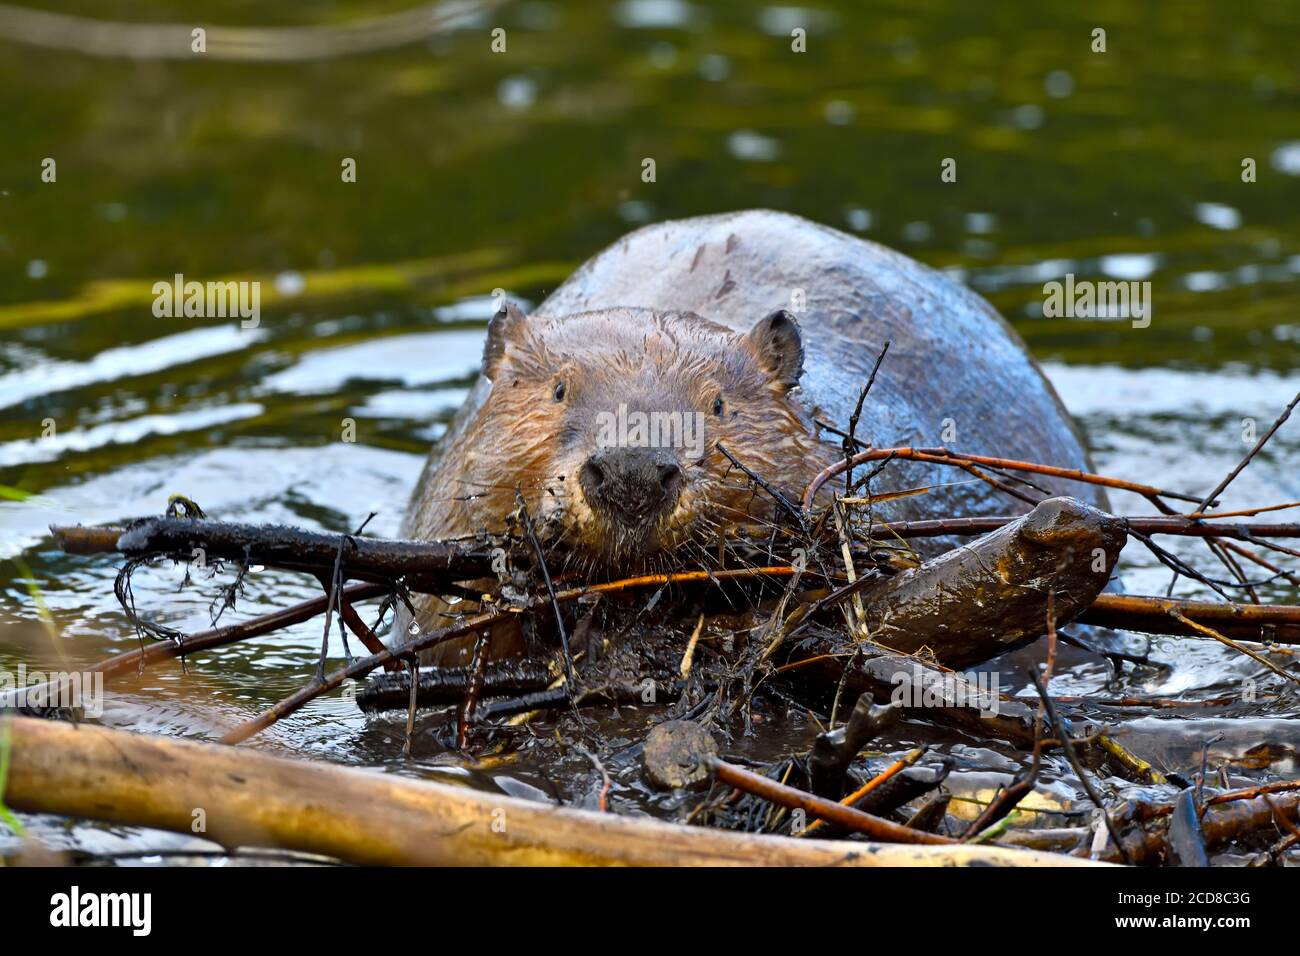 A wild beaver 'Castor canadensis', carrying a load of sticks to repair a leak in his dam in rural Alberta Canada. Stock Photo